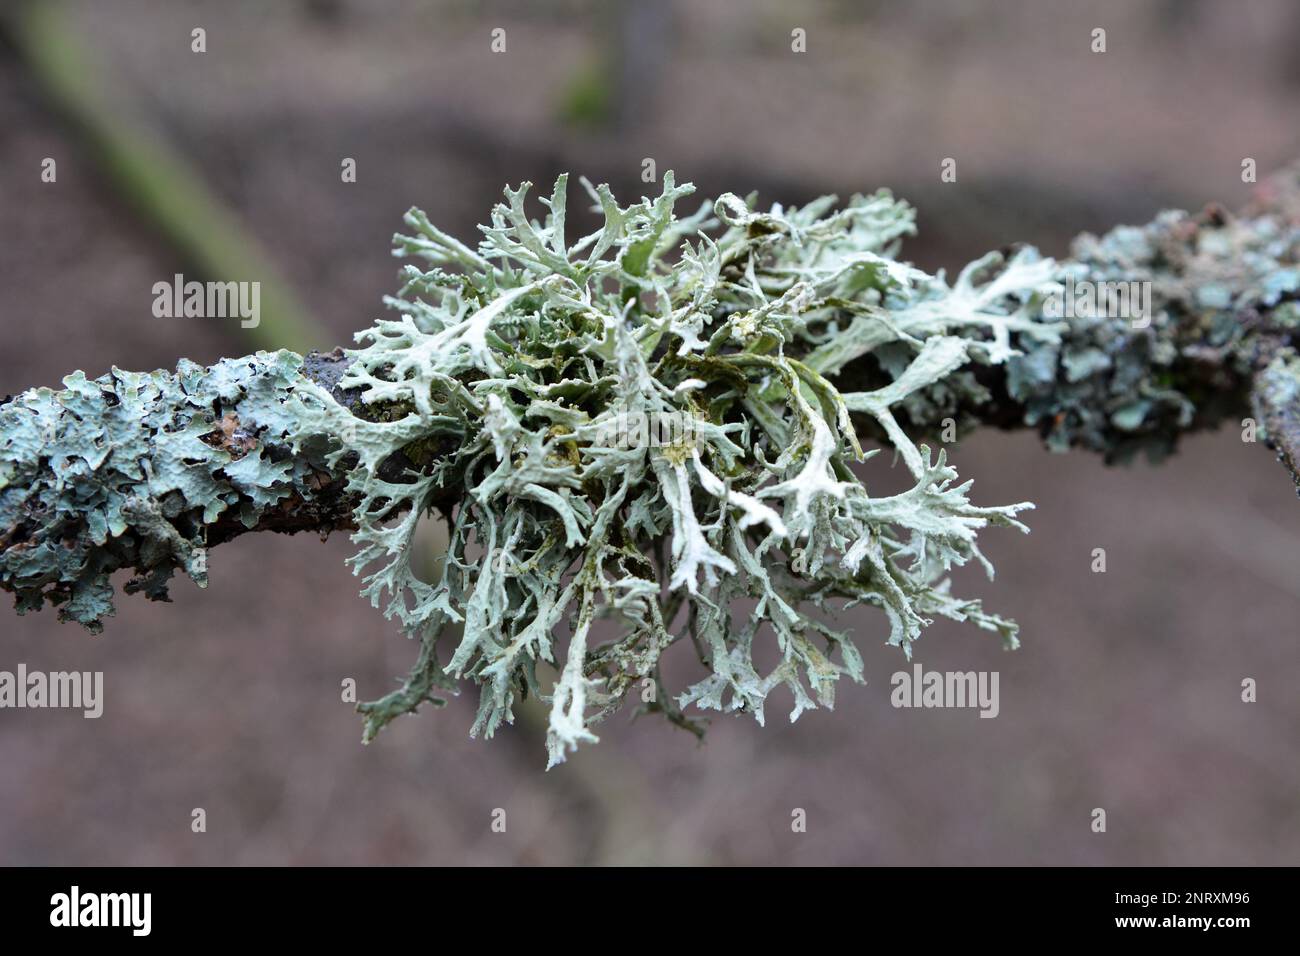 Lichen Evernia prunastri from the genus Evernia of the family Parmeliaceae (Parmeliaceae) grows in the wild Stock Photo